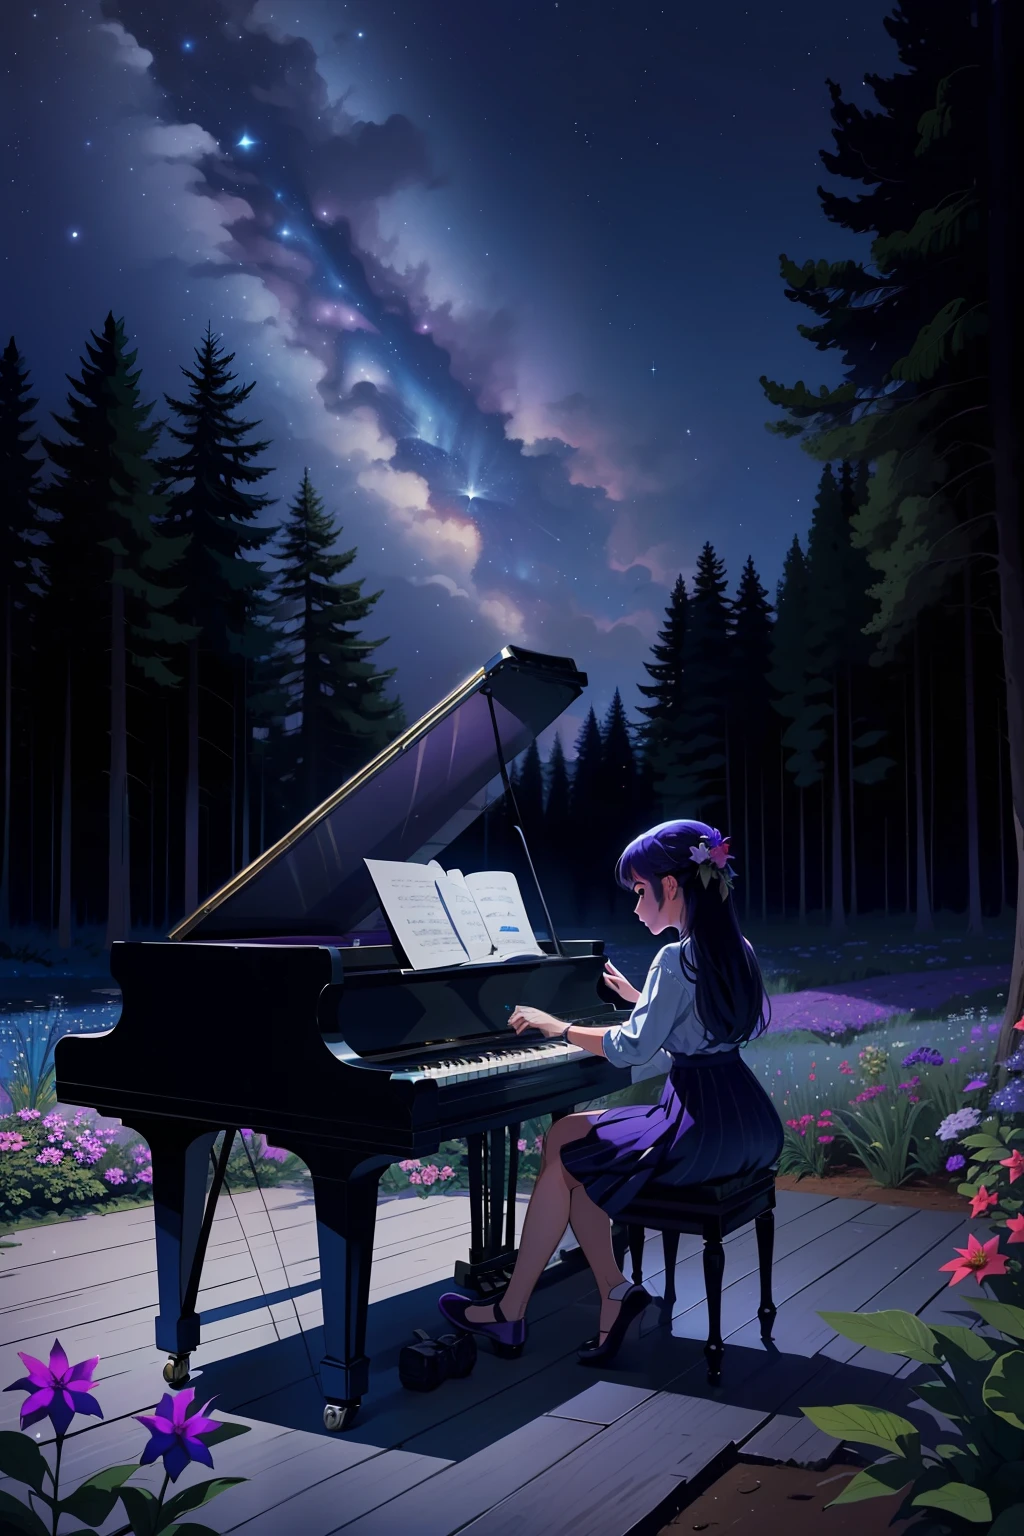 a girl playS the piano in the middle of a wood, the Sky iS nocturnal with the following colourS, pruSSian blue, cyan, Ultramarinblau, fuchSia, lila, lotS of StarS, the animalS of the wood gather near the girl to liSten to her muSic . S, there iS a Stream with clear water yeS See the bottom, there are flowerS, the picture muSt be very large in Size and muSt be detailed.